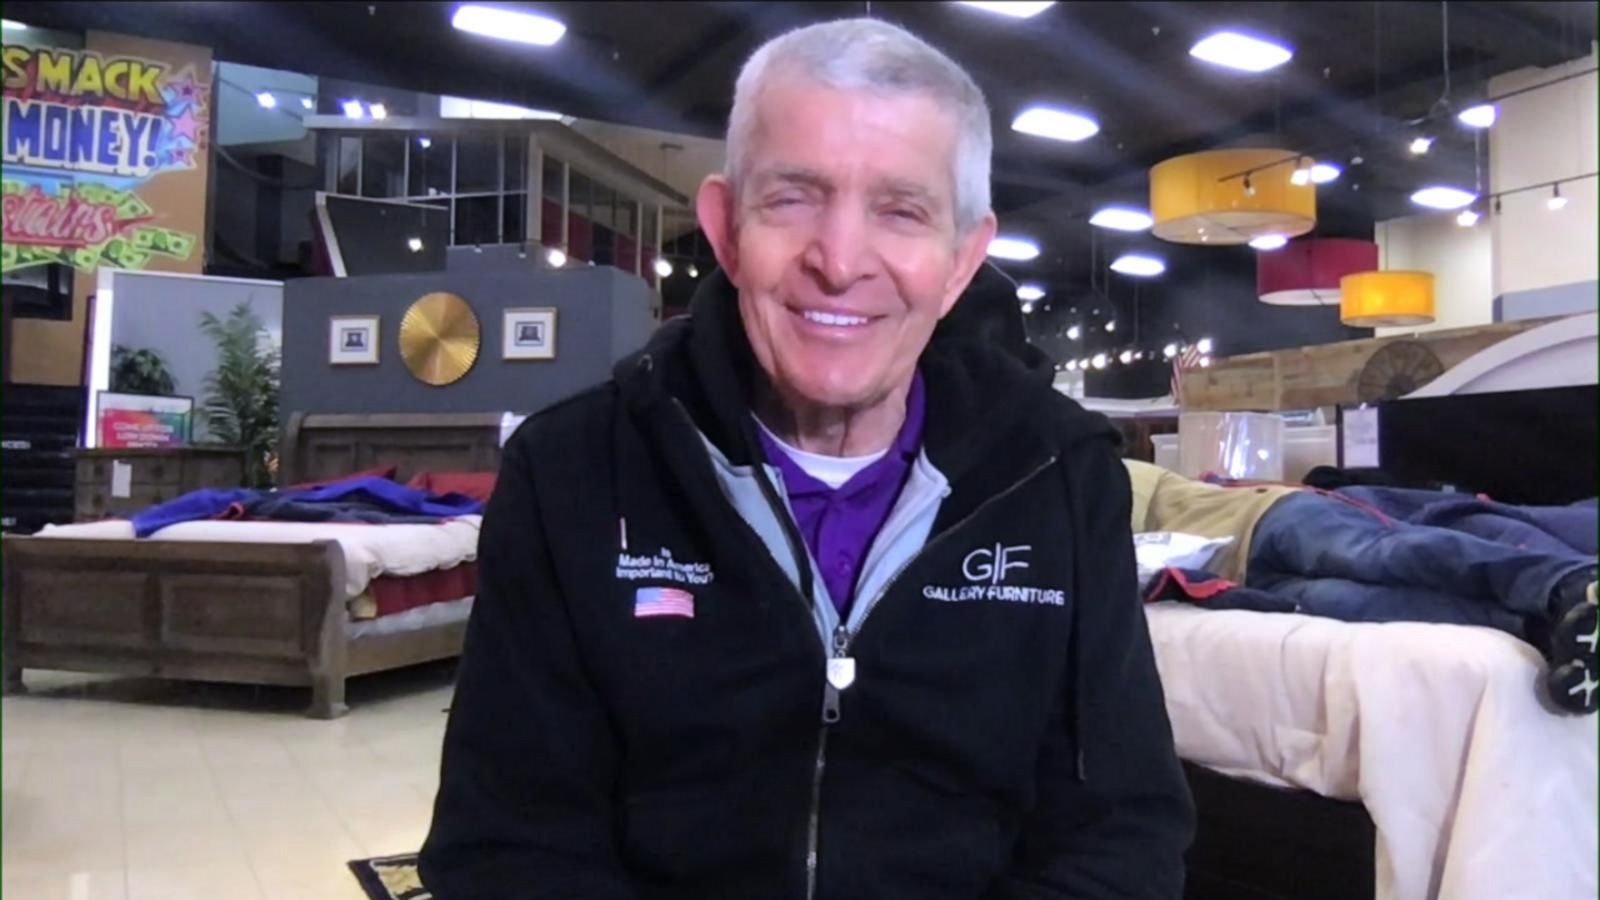 Mattress Mack: Multi-Millionaire Entrepreneur Warms Hearts and Hundreds of  Texans in the Snowpocalypse - Capitalism